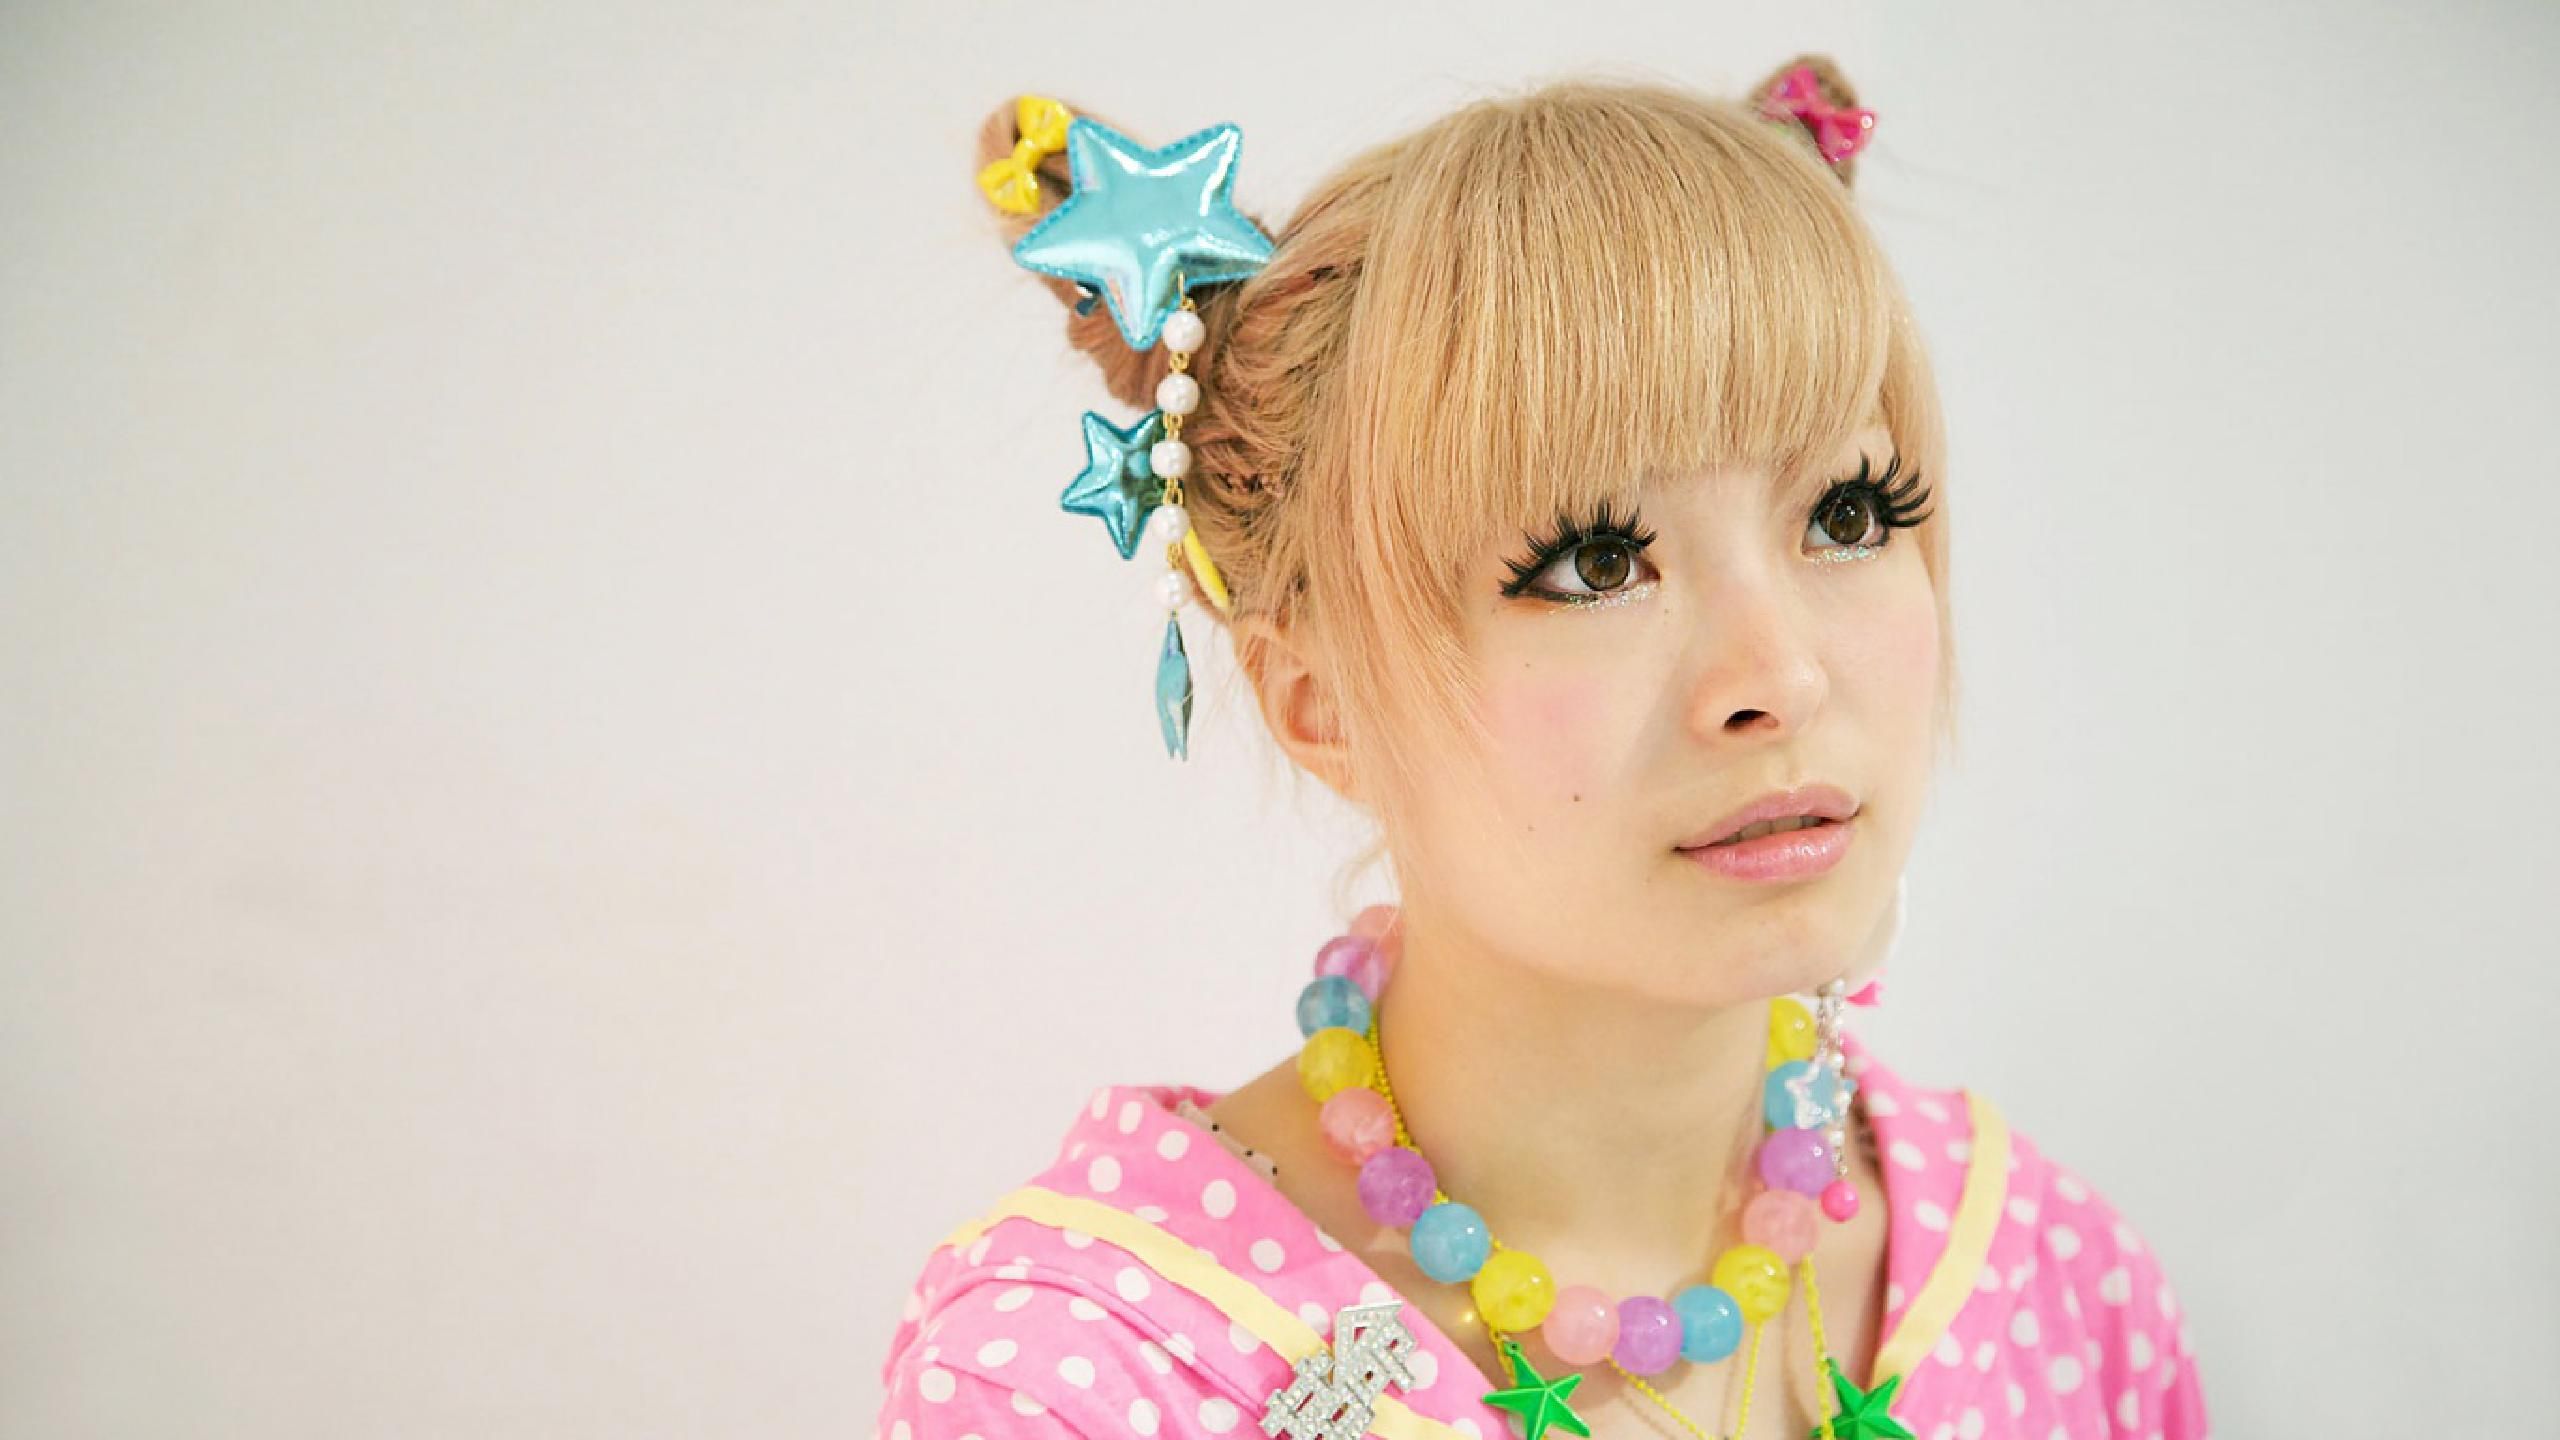 Kyary Pamyu Pamyu tour dates 2020 2021. Kyary Pamyu Pamyu tickets and concerts. Wegow United States